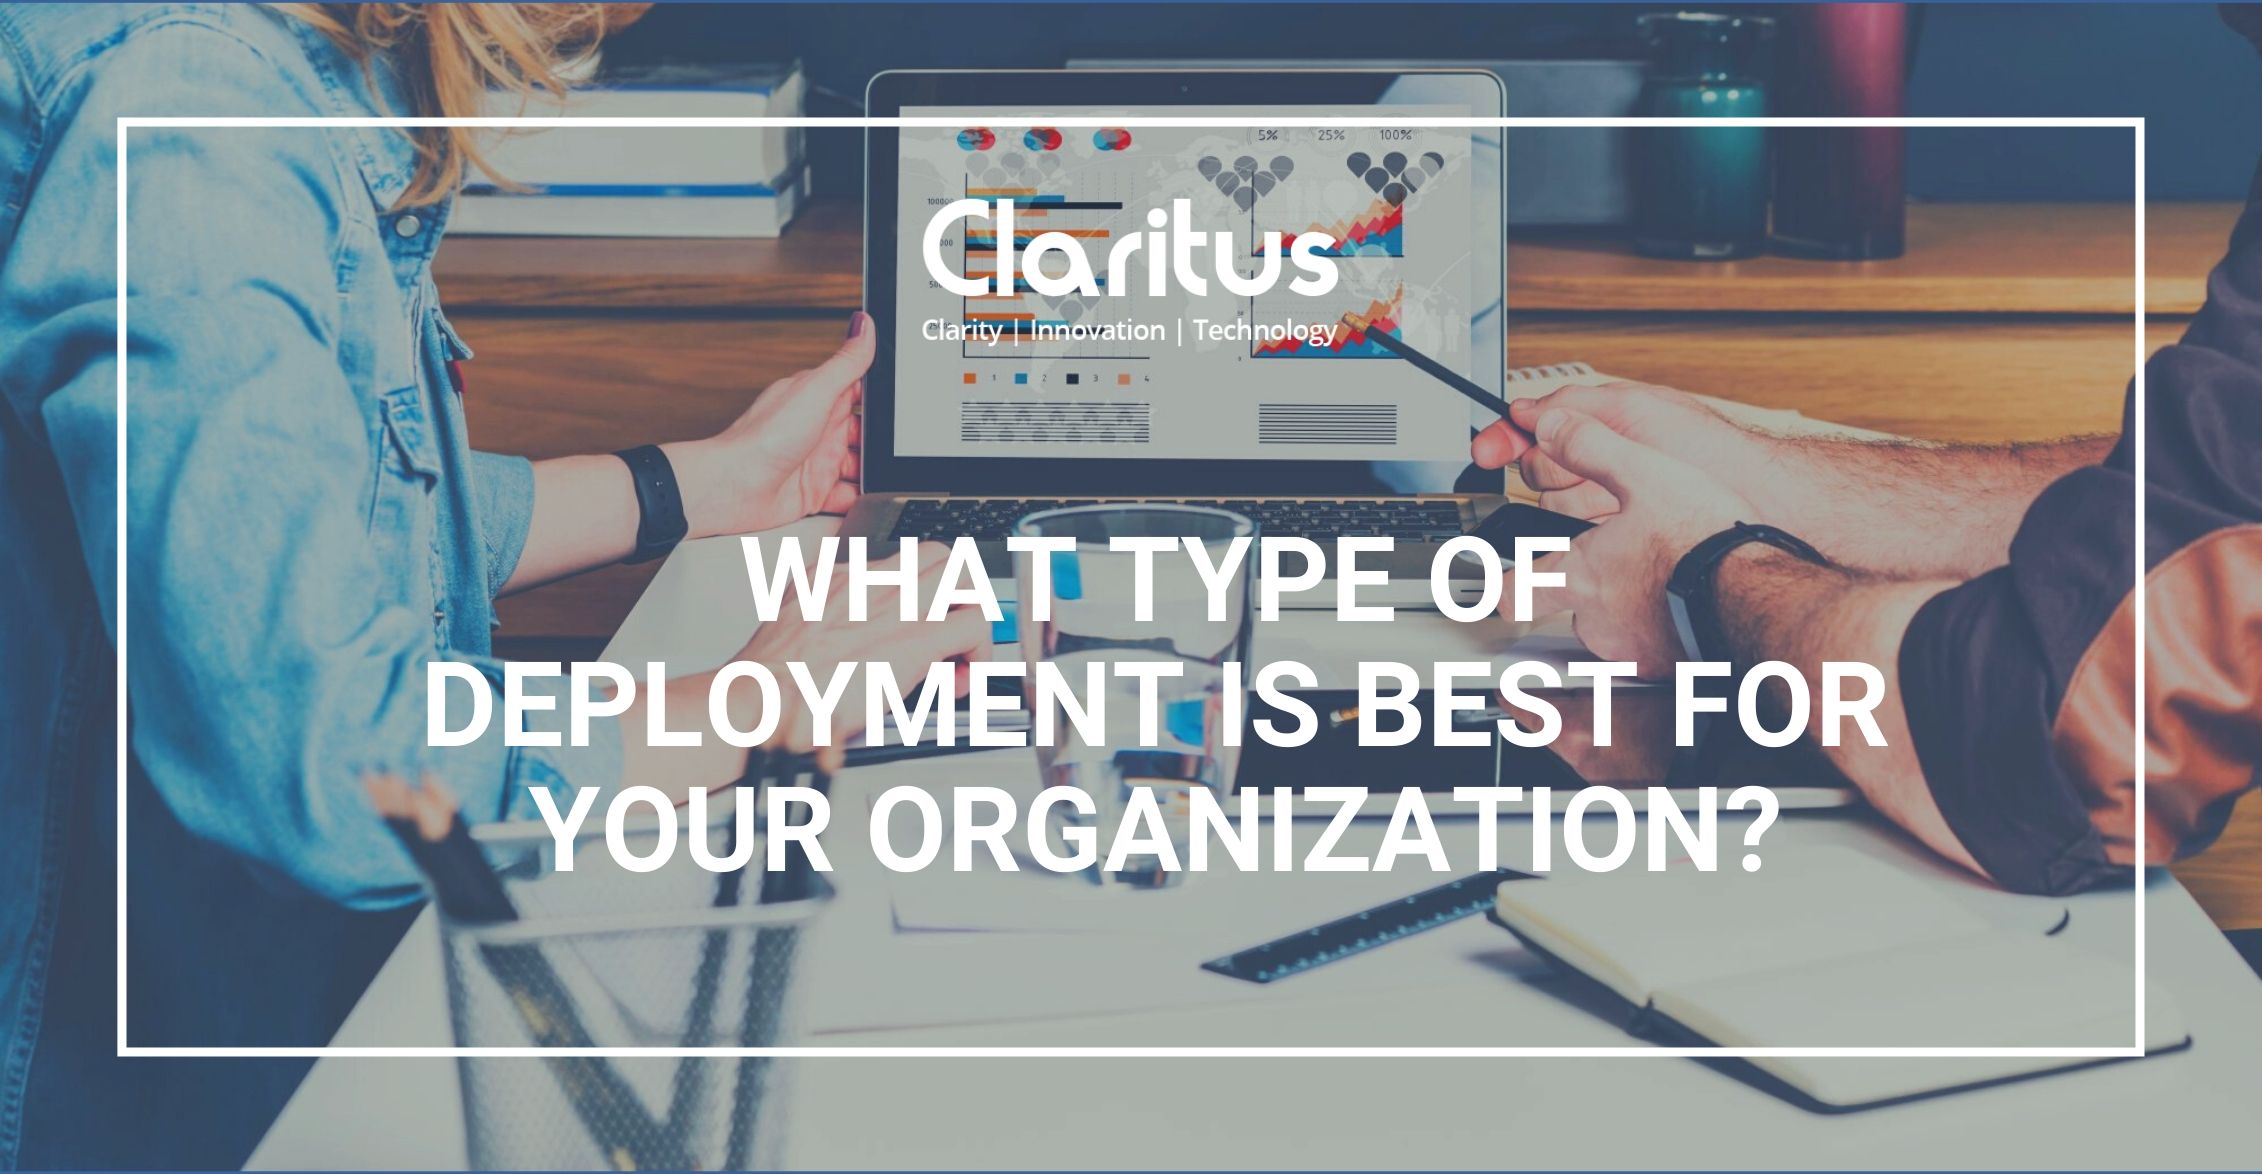 What type of deployment is best for your organization